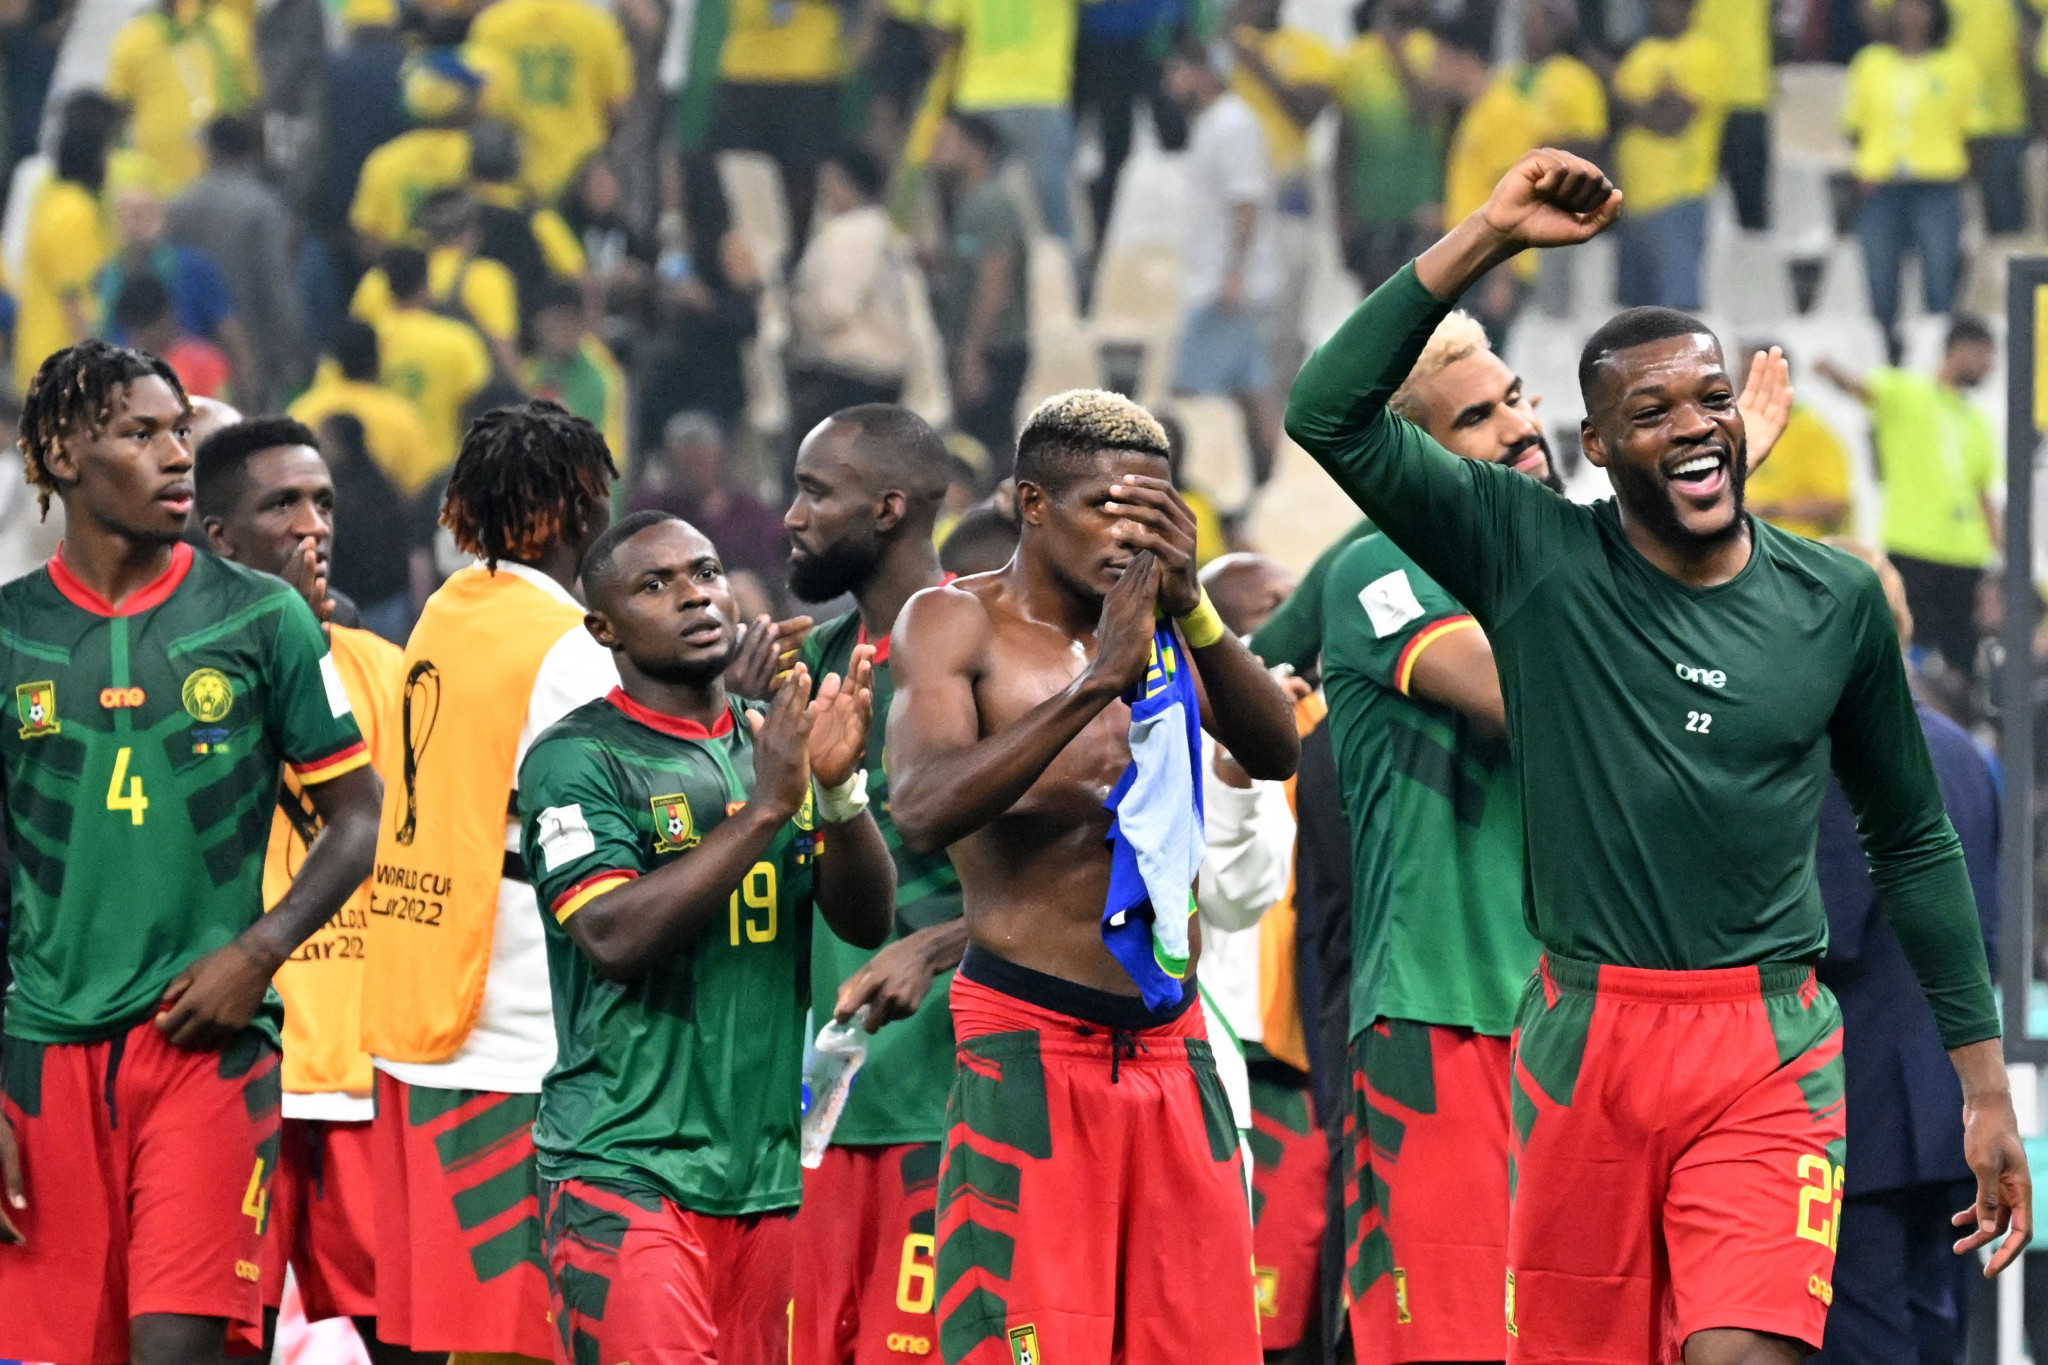 Cameroon were to have played in Russia for the first time next month but the match has been cancelled ©Getty Images